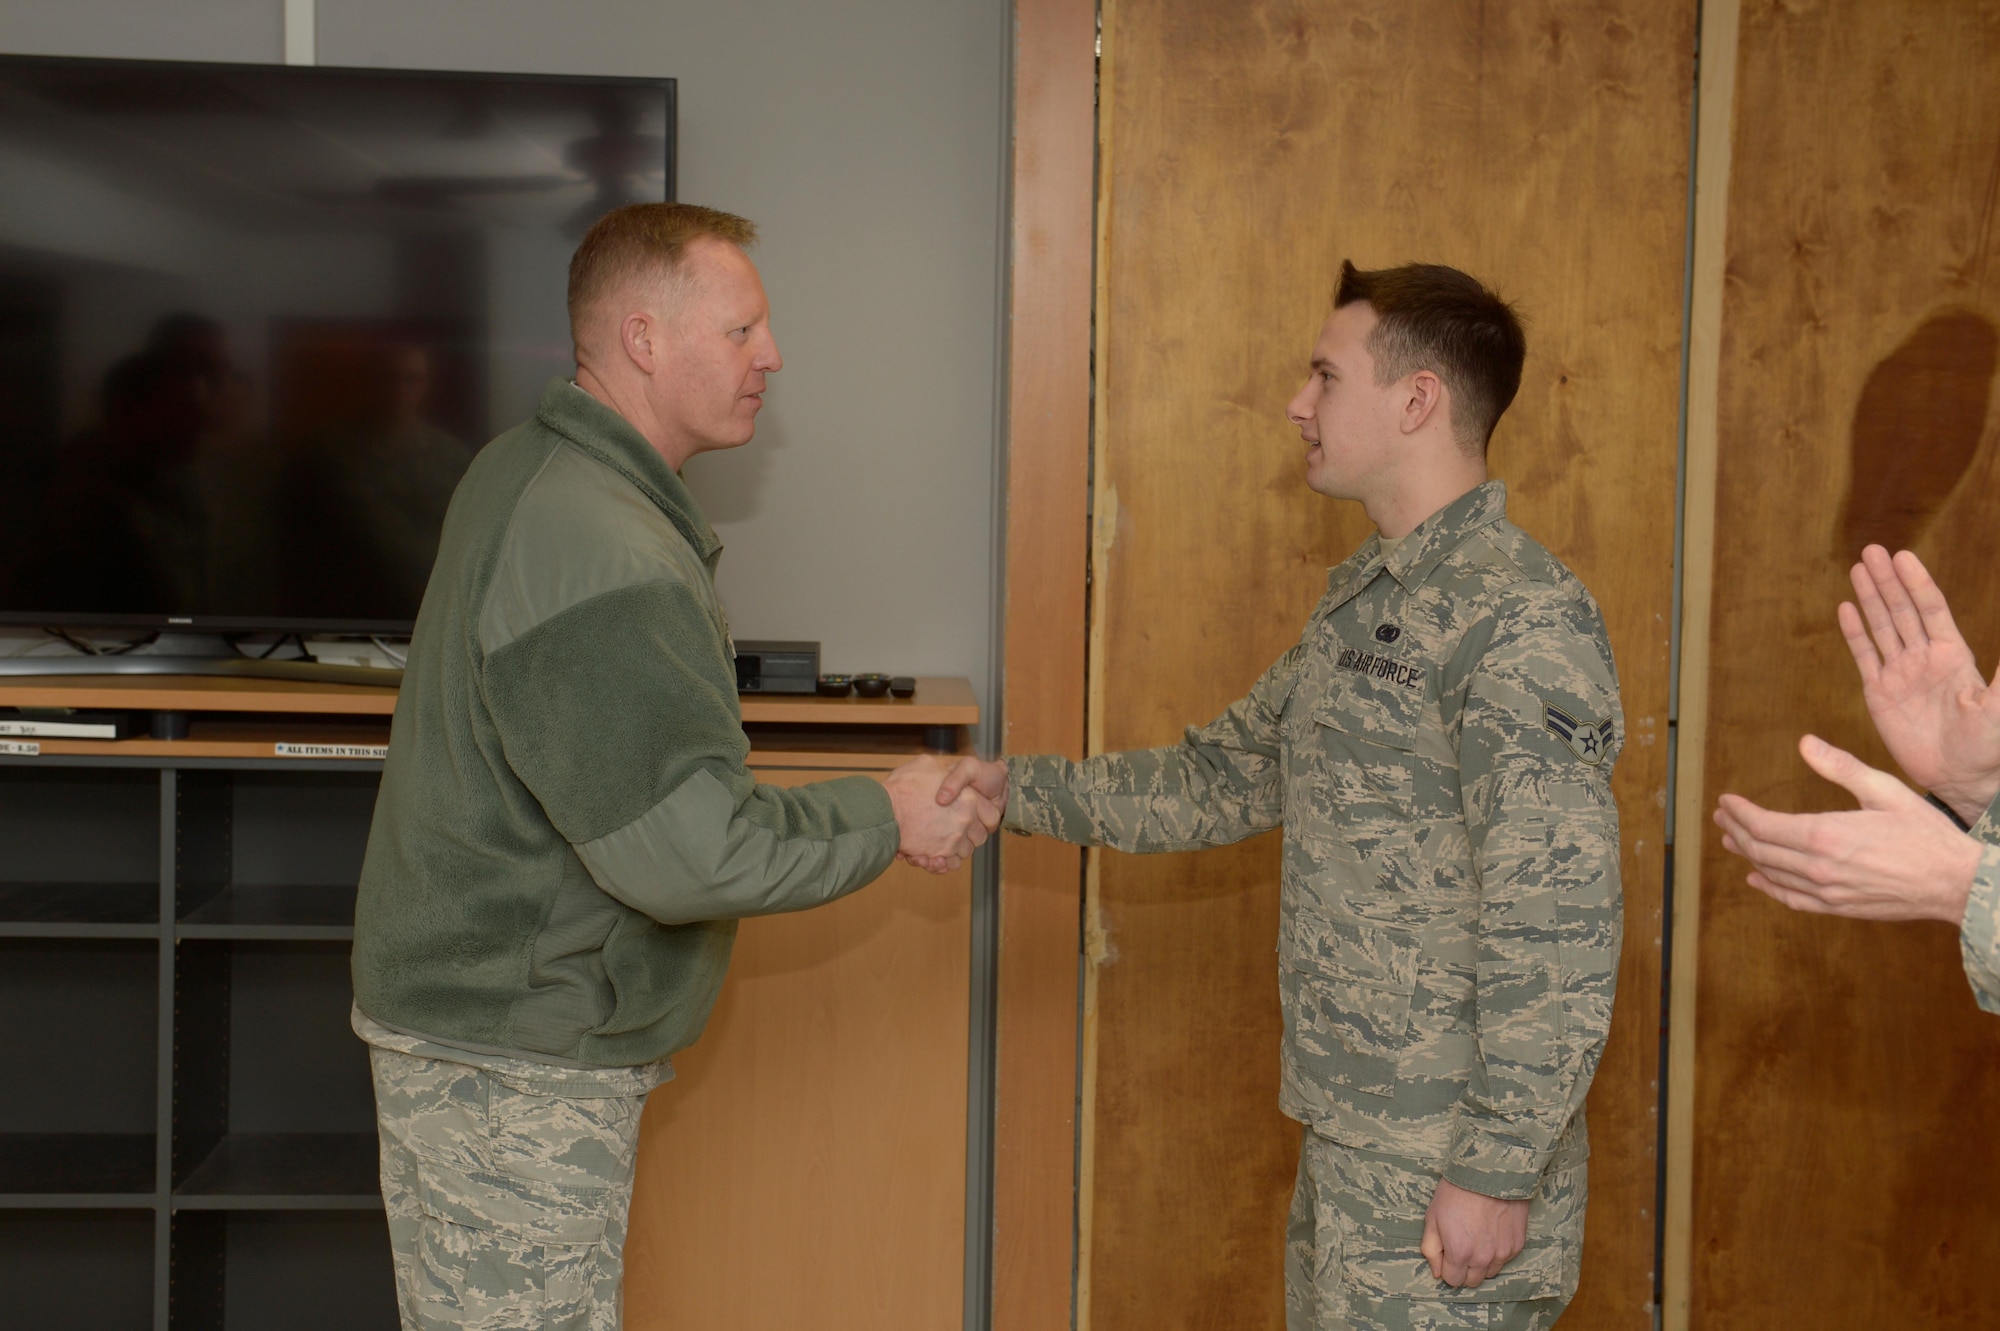 Airman 1st Class Ein Odgers, 52nd Logistics Readiness Squadron fuel distribution operator, is coined by Col. Joe McFall, 52nd Fighter Wing commander, for his actions in a Green Dot social experiment at Spangdahlem Air Base, Germany, Jan. 11, 2017. Green Dot has been conducting several scenarios around base to see how individuals will react to the actors. (U.S. Air Force photo by Staff Sgt.
Jonathan Snyder)